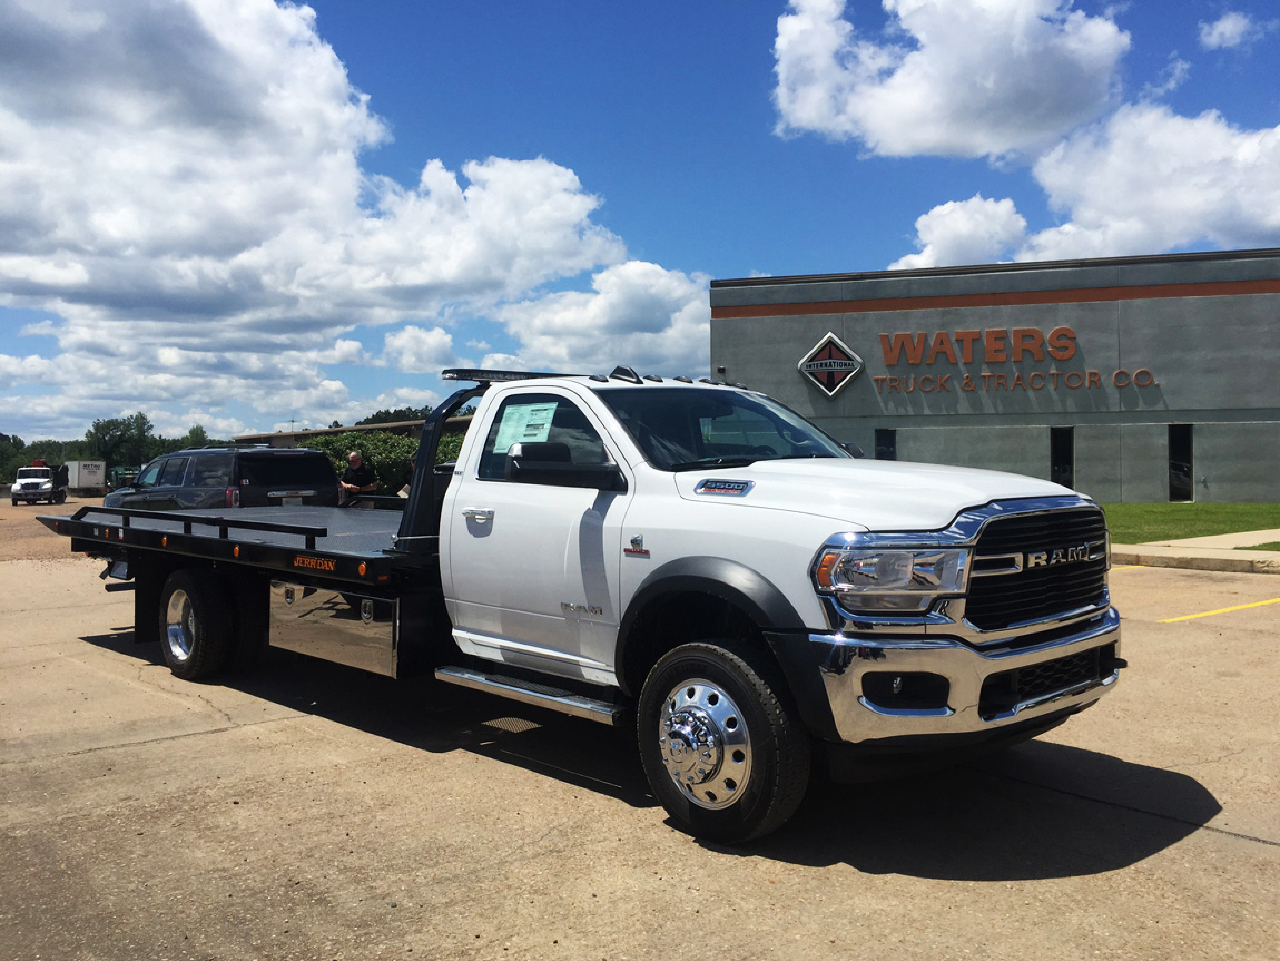 2024 DODGE RAM 5500 ROLLBACK TOW TRUCK FOR SALE 3083